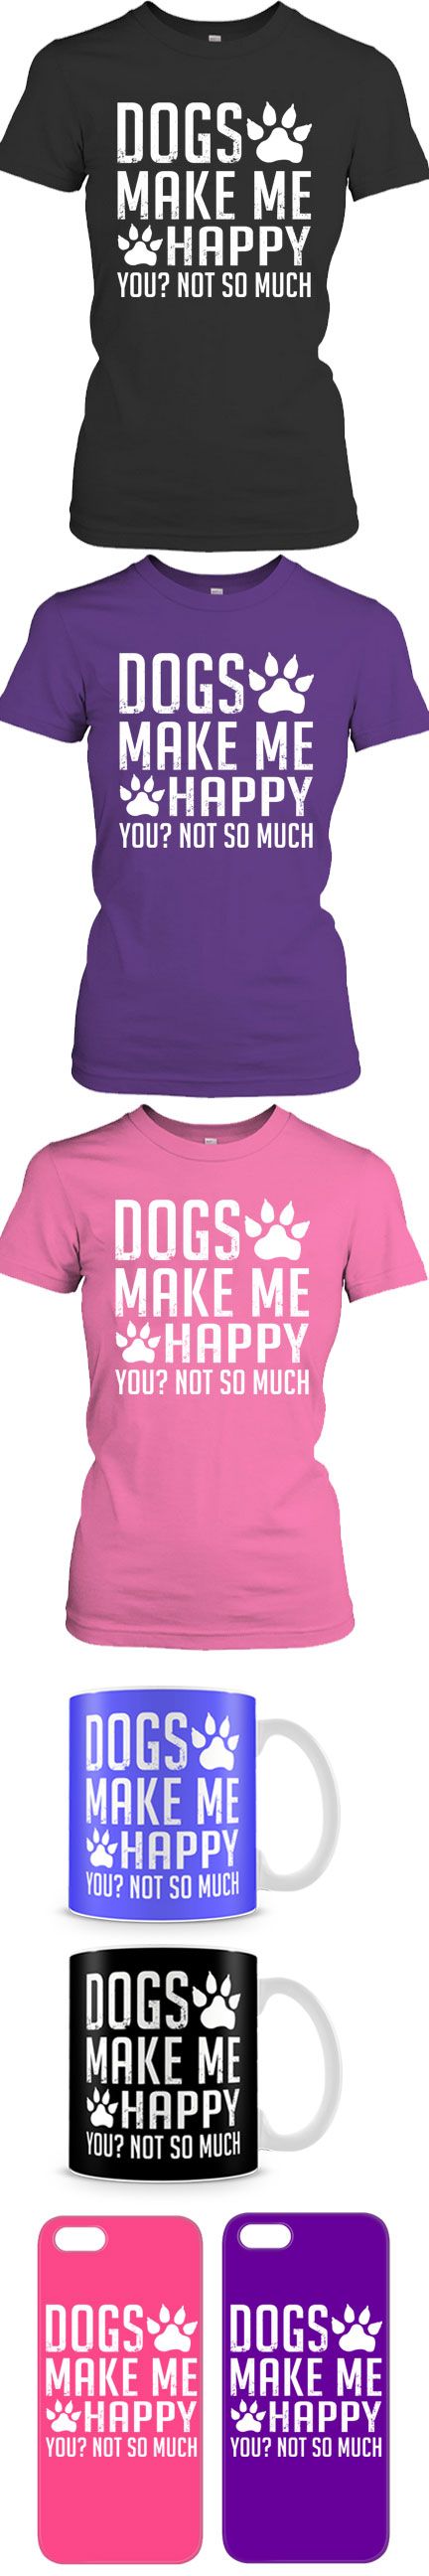 Does Your Dog Make You Happy?Then Click The Image To Buy It Now or Tag Someone You Want To Buy This For.